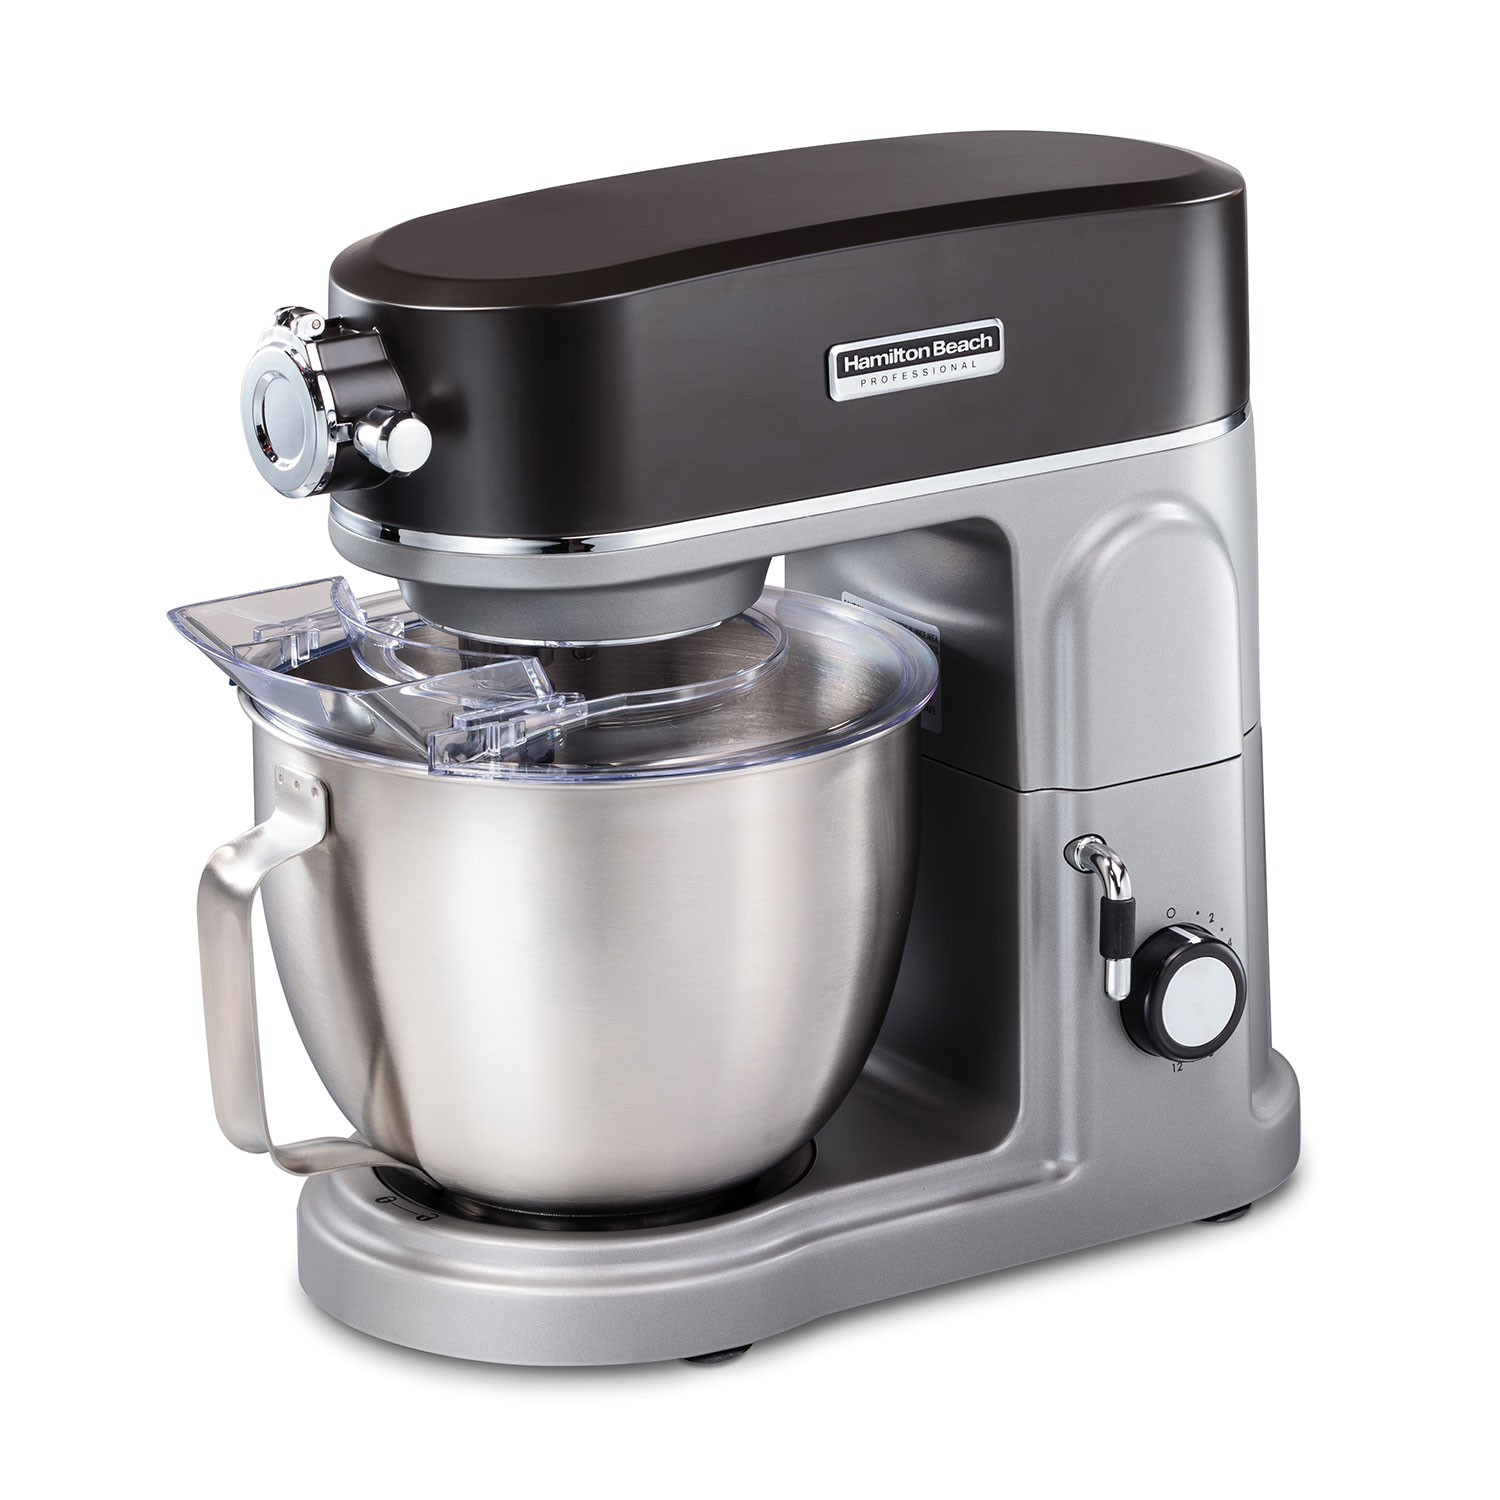 Hamilton Beach<sup>®</sup> Professional All-Metal Stand Mixer with Specialty Attachment Hub